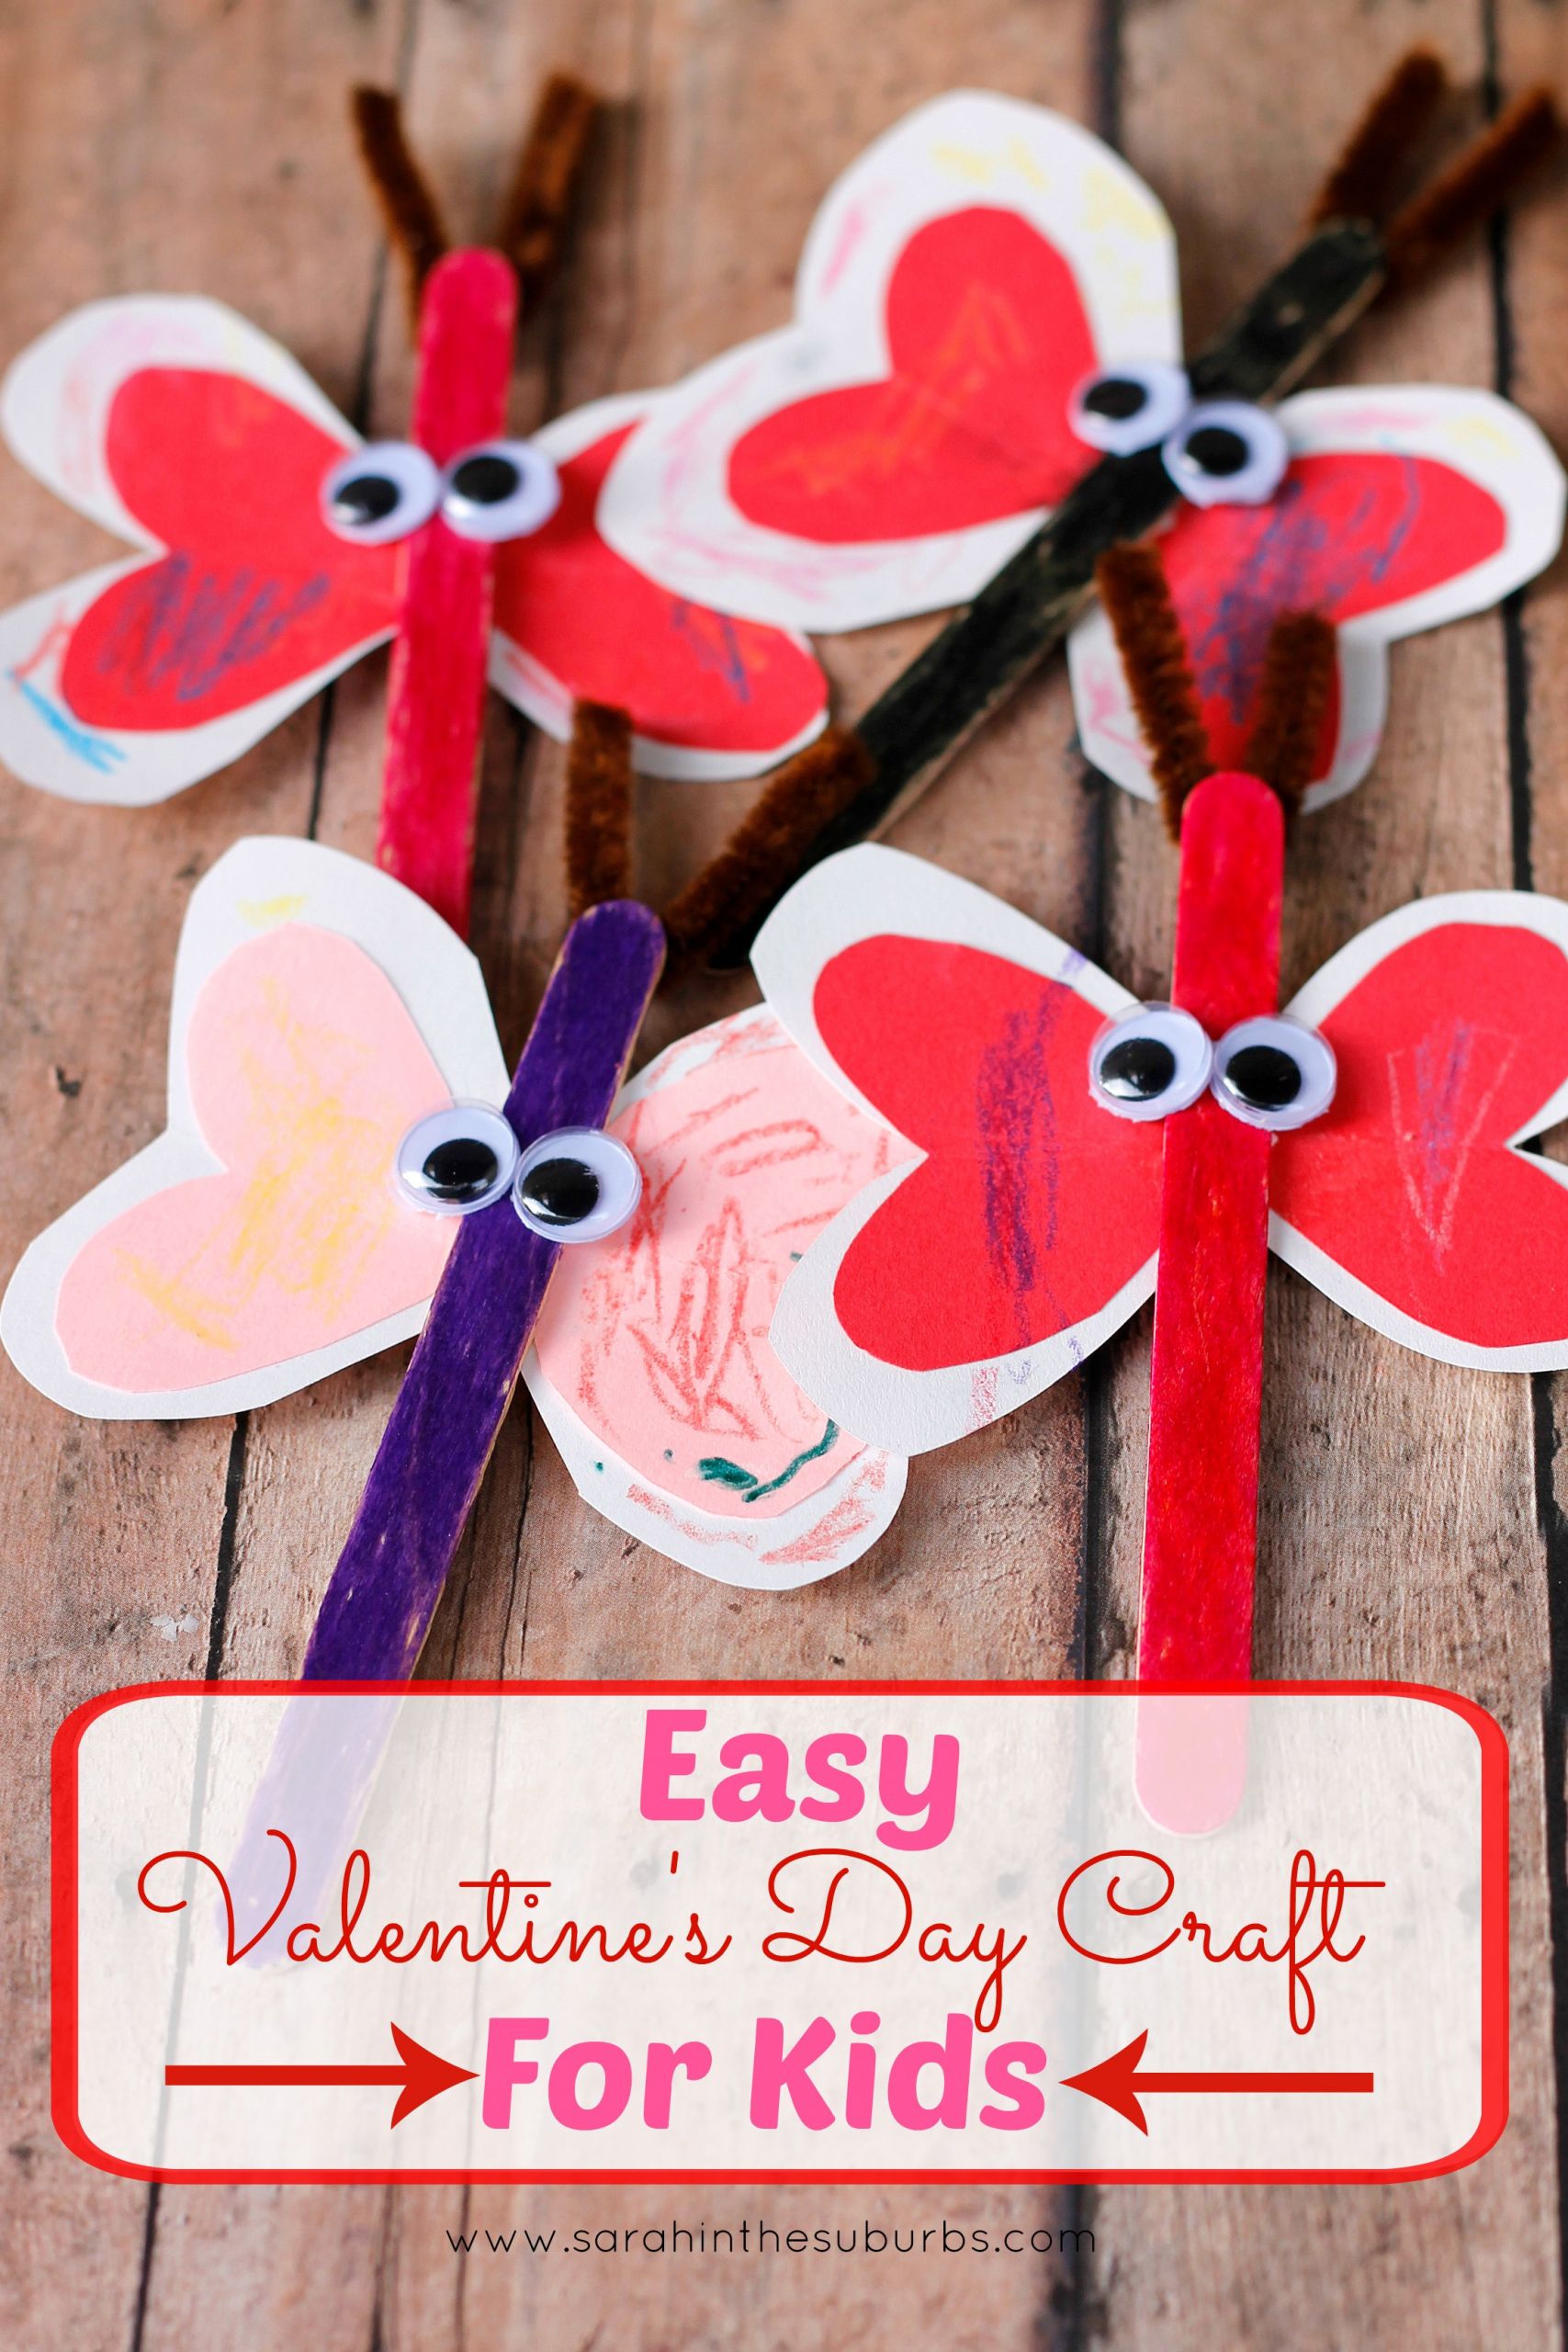 Valentine Day Crafts For Preschoolers Easy
 Easy Valentine s Day Craft for Kids Sarah in the Suburbs